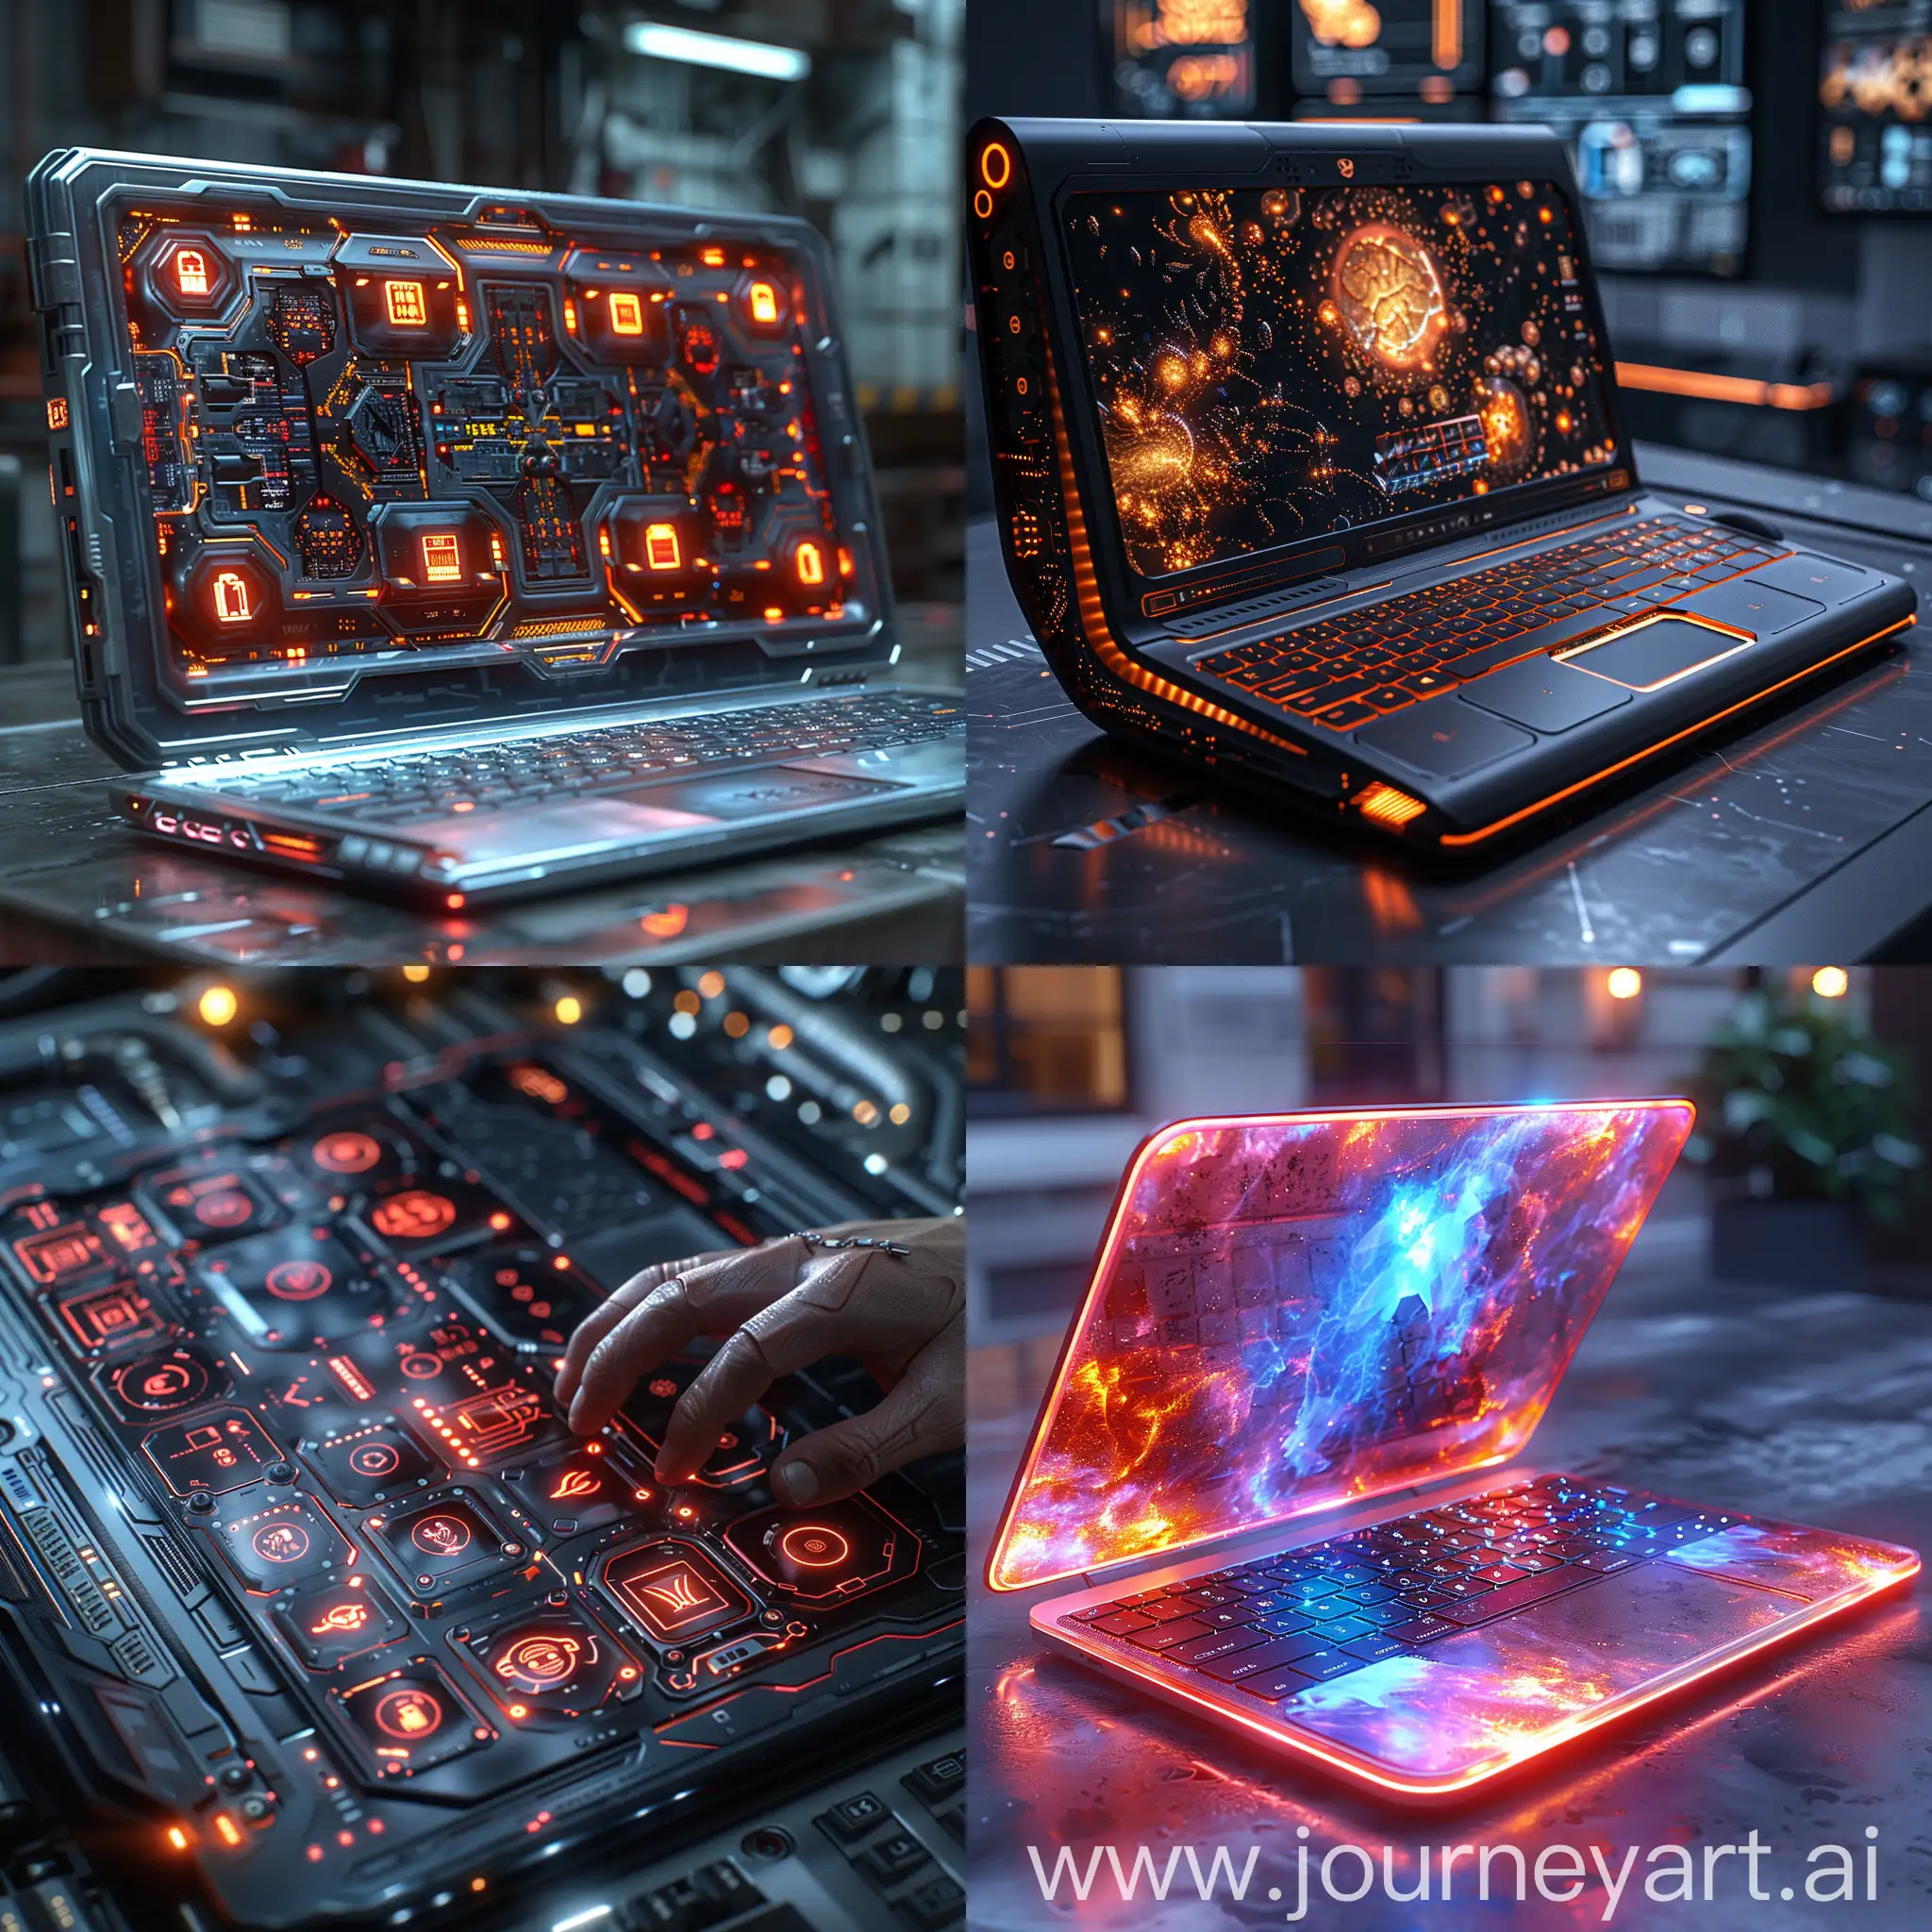 Futuristic laptop, high tech, Foldable or rollable displays, Augmented reality (AR) and virtual reality (VR) capabilities, Brain-computer interfaces (BCIs), Self-healing materials, Ultra-fast processors and graphics cards, Improved battery life, octane render --stylize 1000